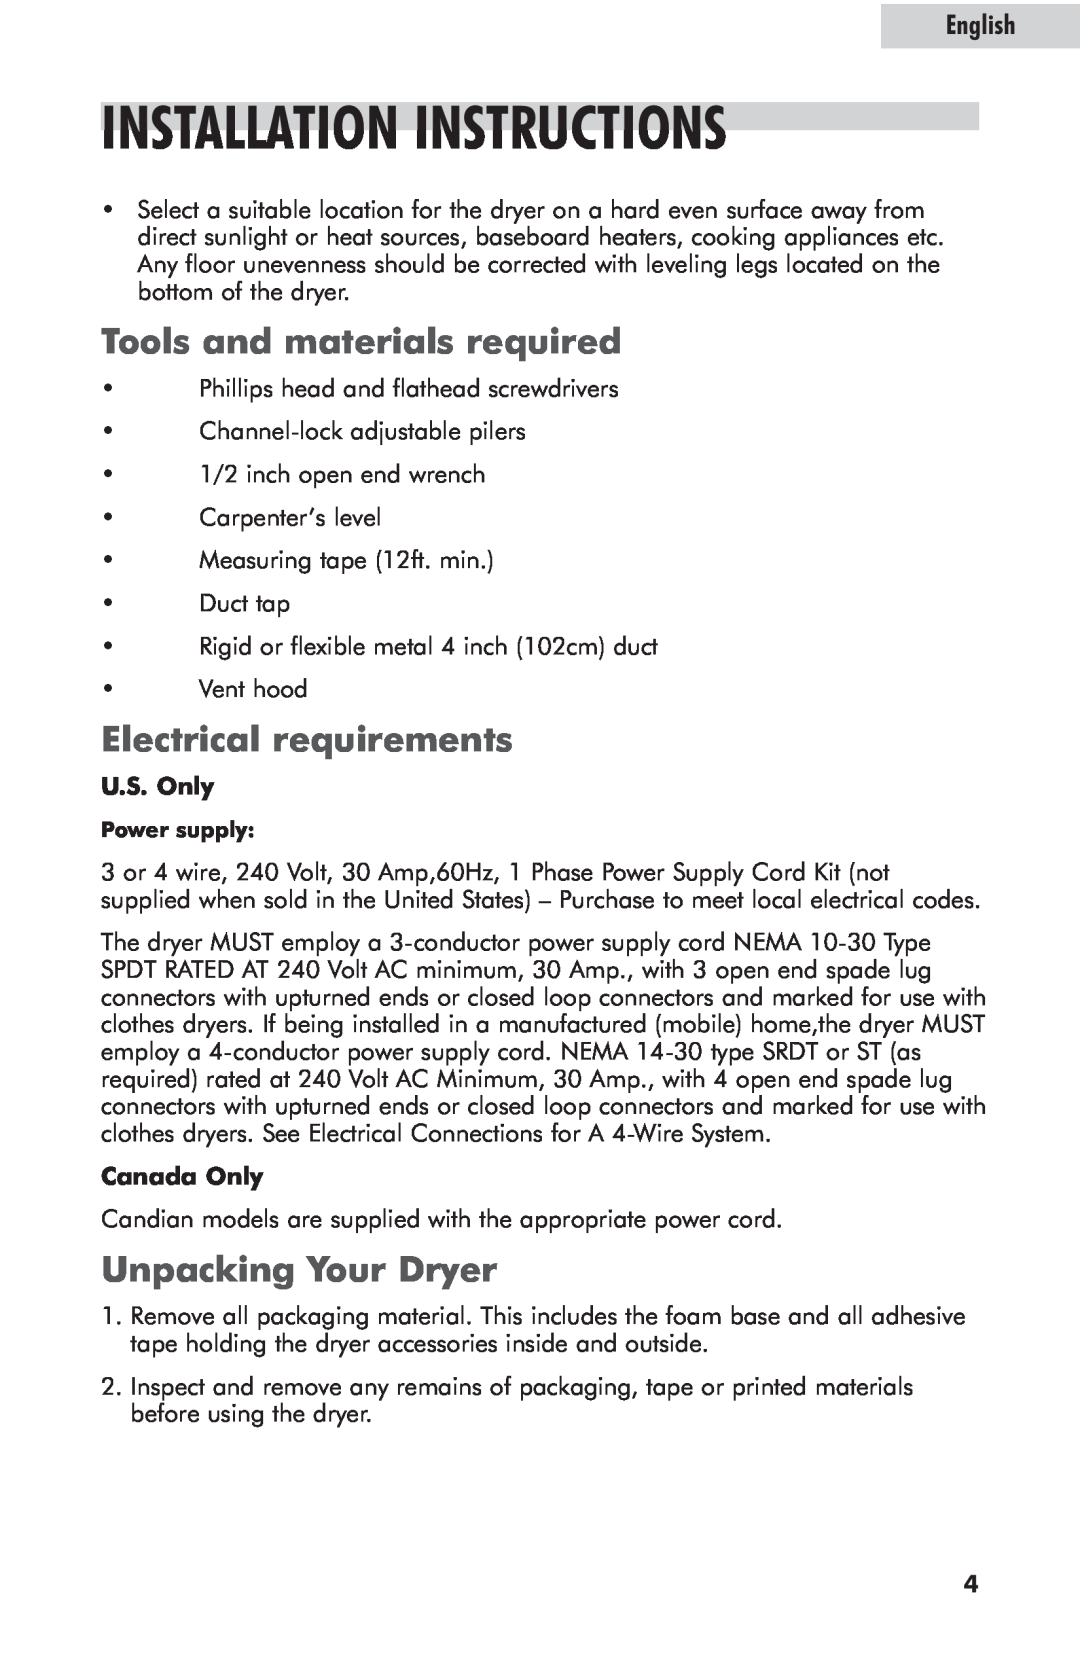 Haier GDE700AW Installation Instructions, Tools and materials required, Electrical requirements, Unpacking Your Dryer 